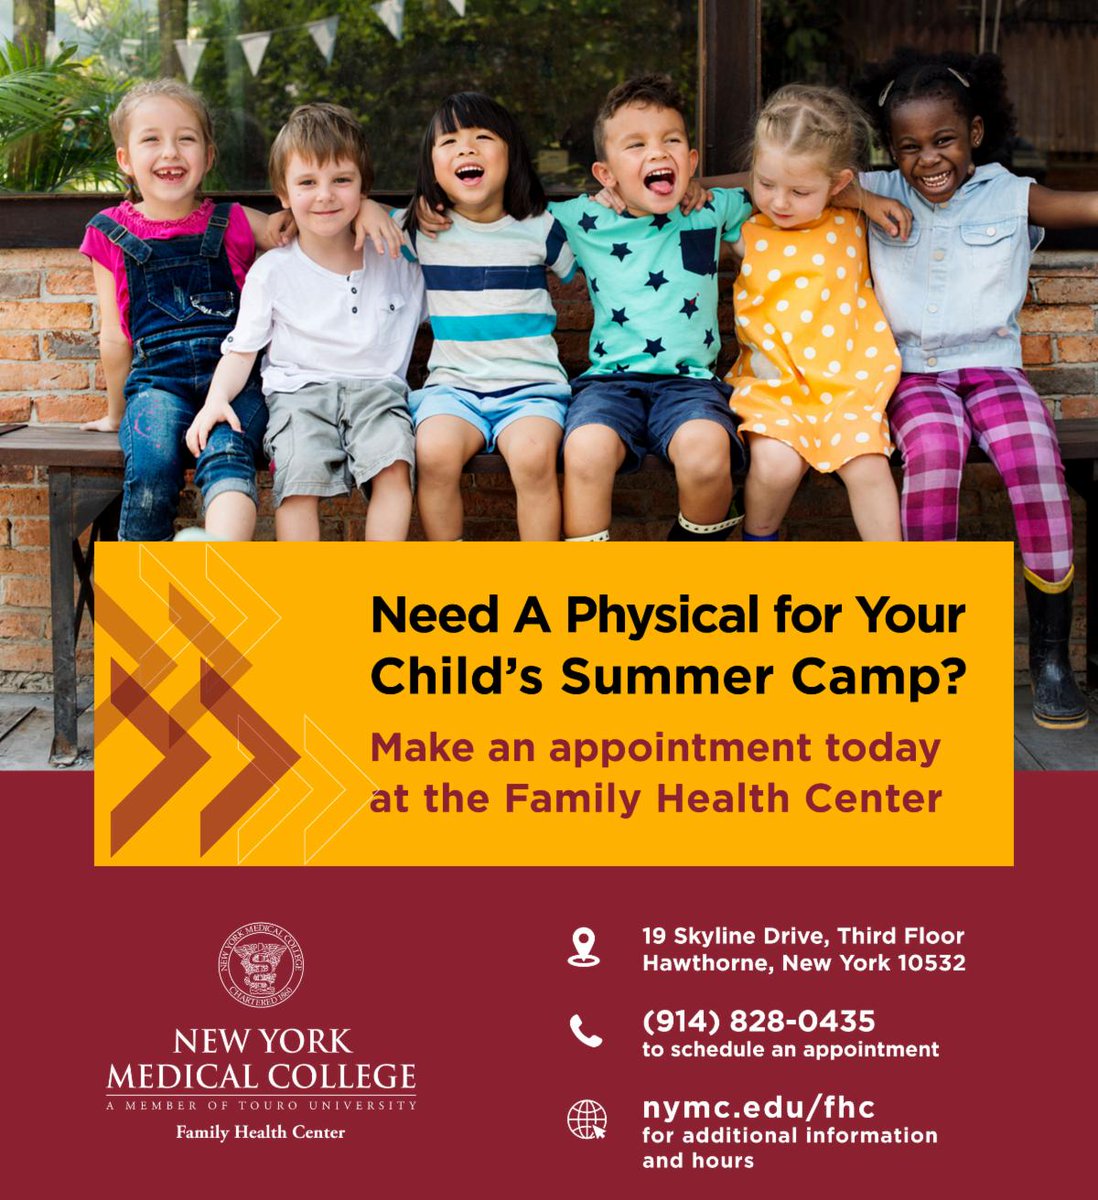 Need a physical for your child's summer camp? Make an appointment today at the Family Health Center. Open to the public. nymc.edu/fhc #NYMC #familymedicine #familyclinic #clinic #westchester